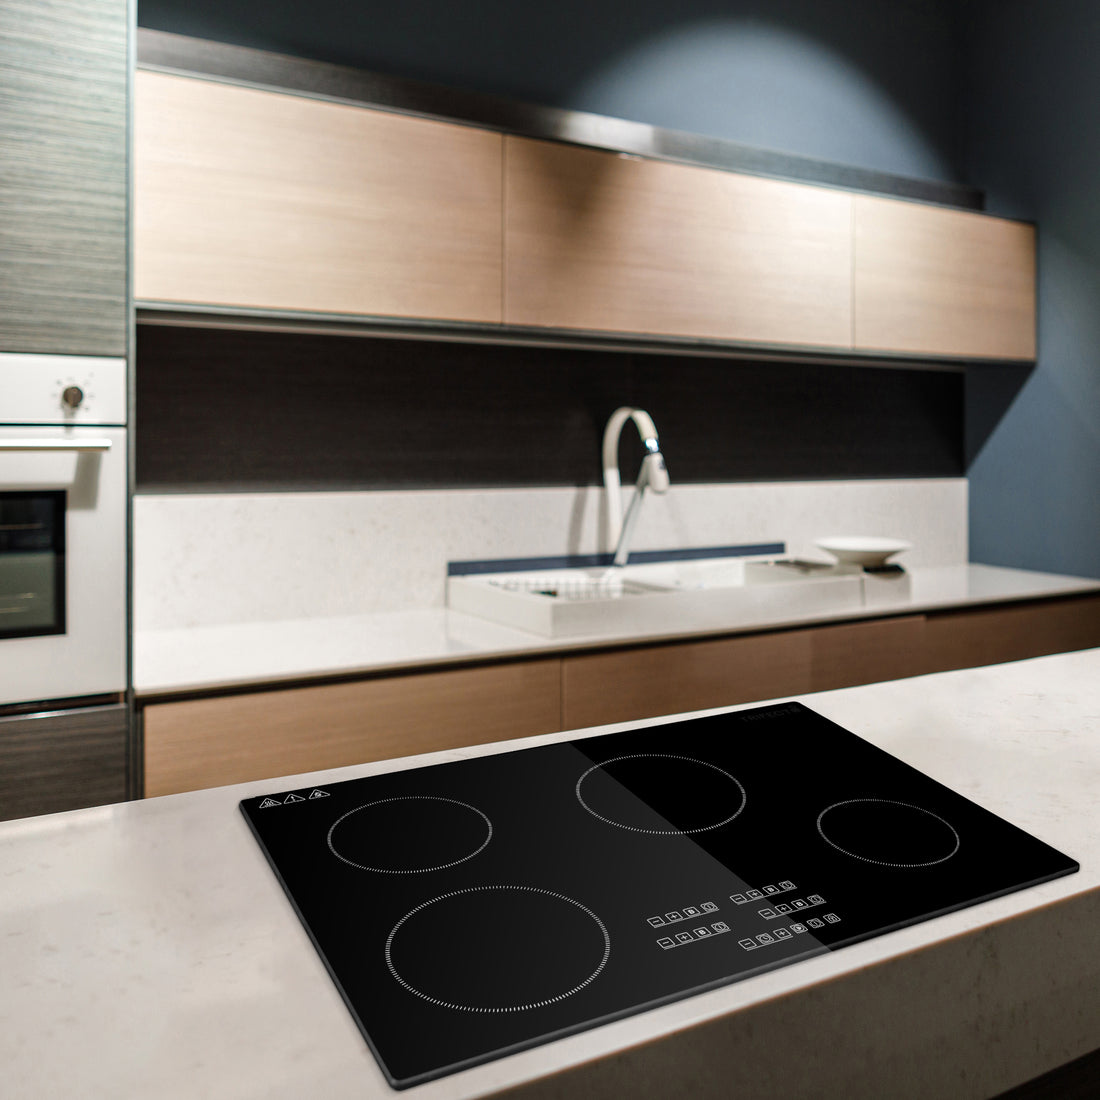 30-inch induction cooktop with four burners in modern kitchen.